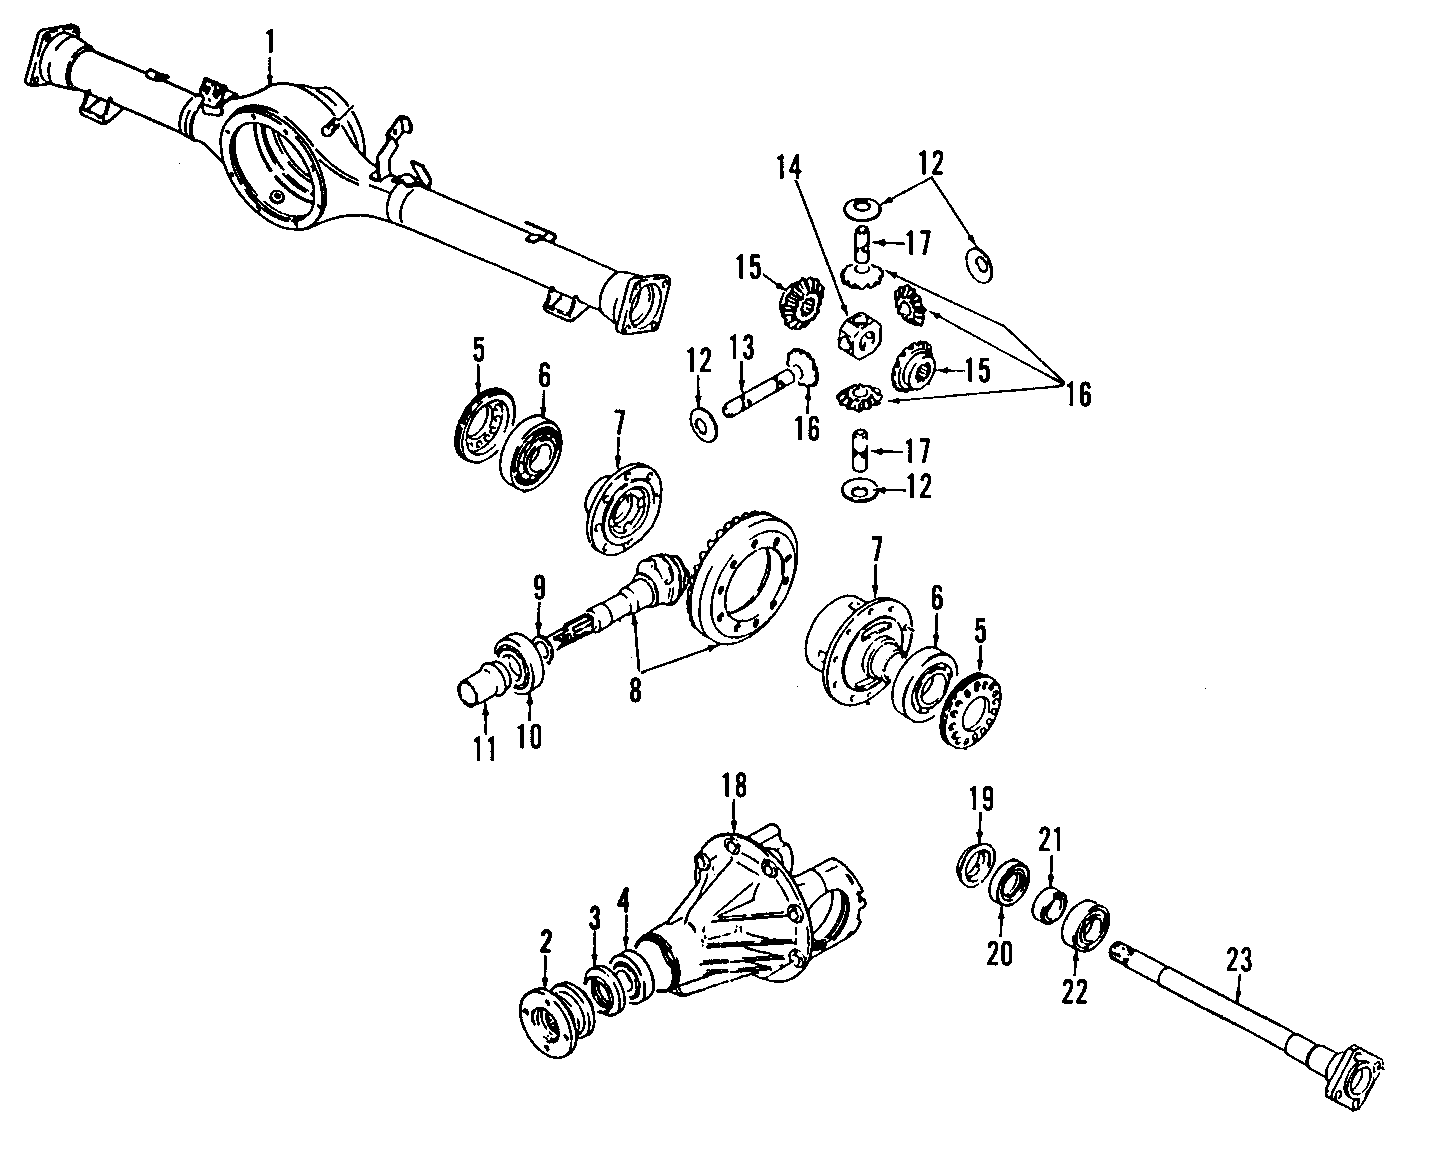 12REAR AXLE. DIFFERENTIAL. PROPELLER SHAFT.https://images.simplepart.com/images/parts/motor/fullsize/T011110.png